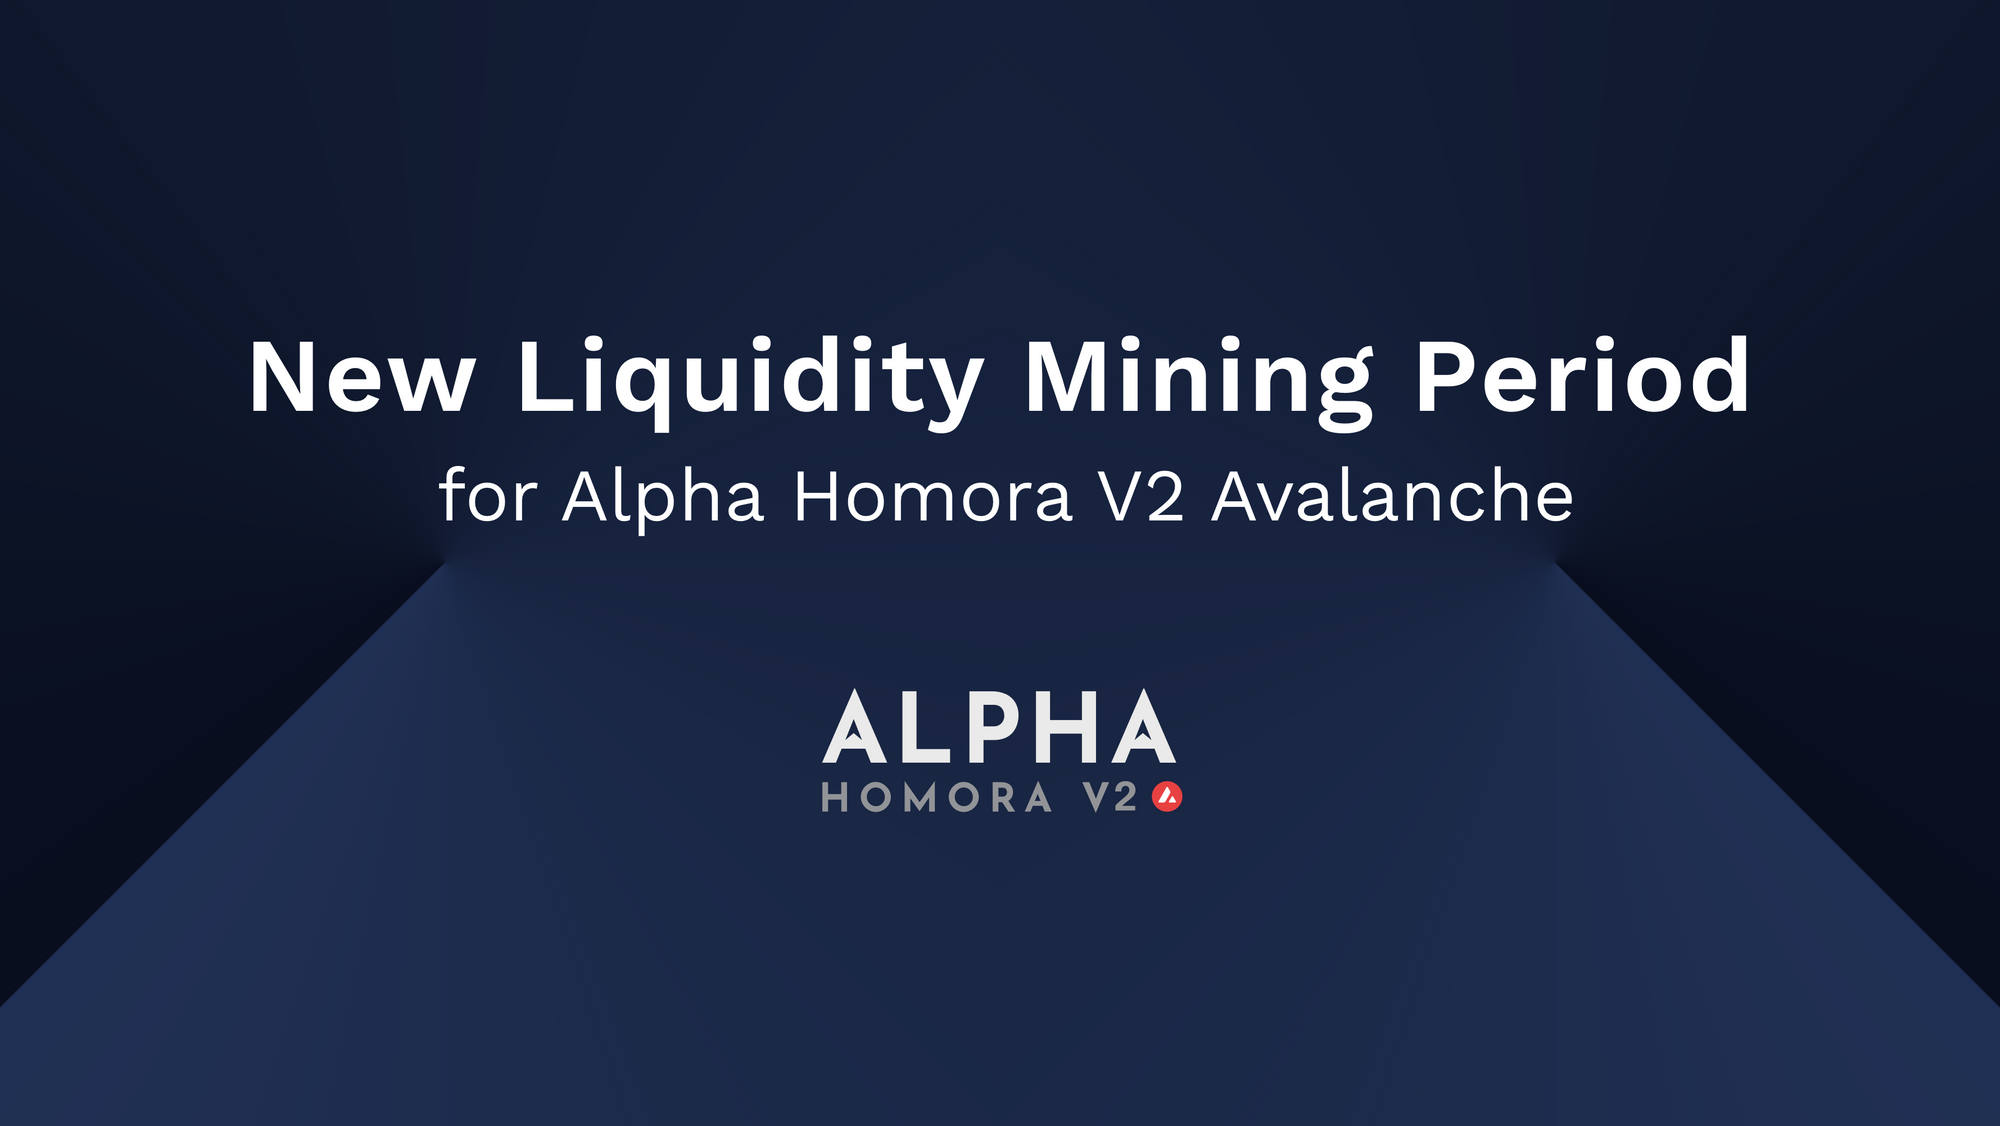 New Liquidity Mining Period and Rewards for Alpha Homora V2 on Avalanche